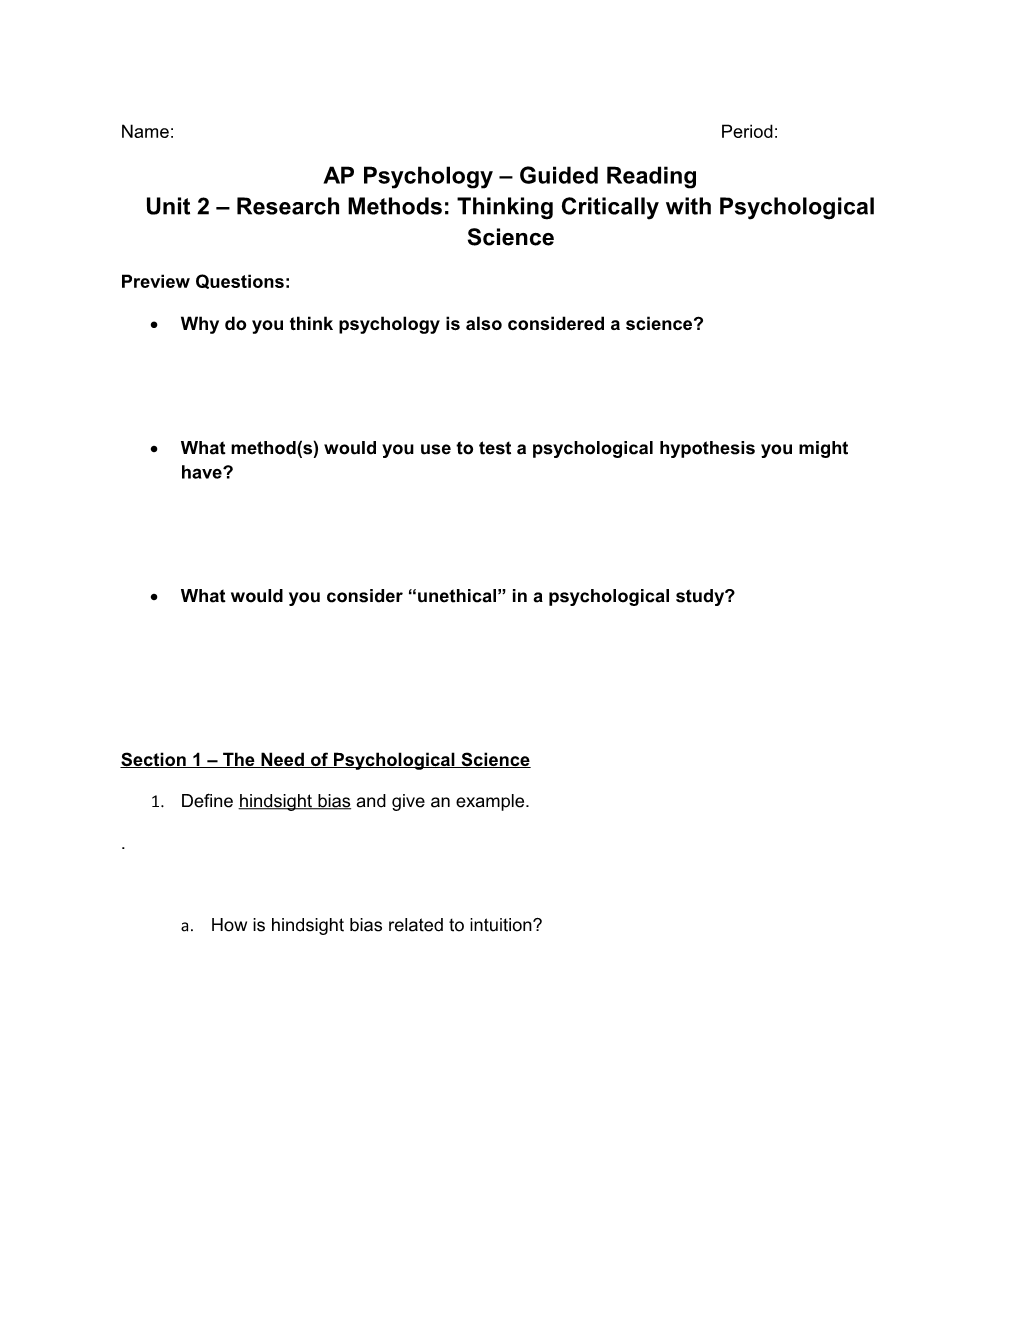 AP Psychology Guided Reading Unit 2 Research Methods: Thinking Critically with Psychological